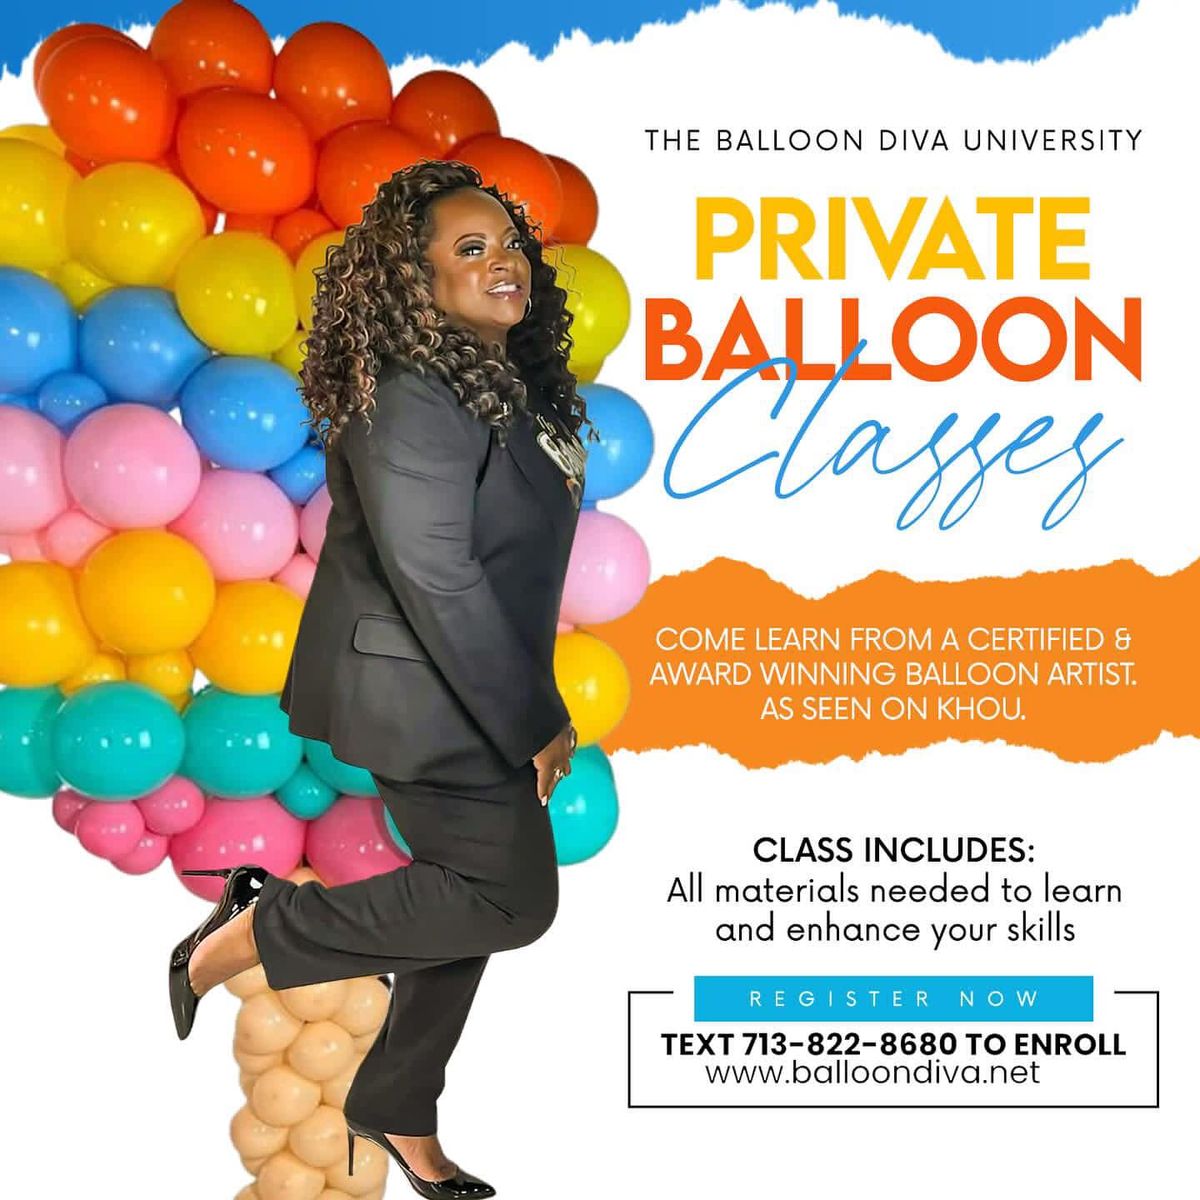 One on One balloon classes with The Balloon Diva